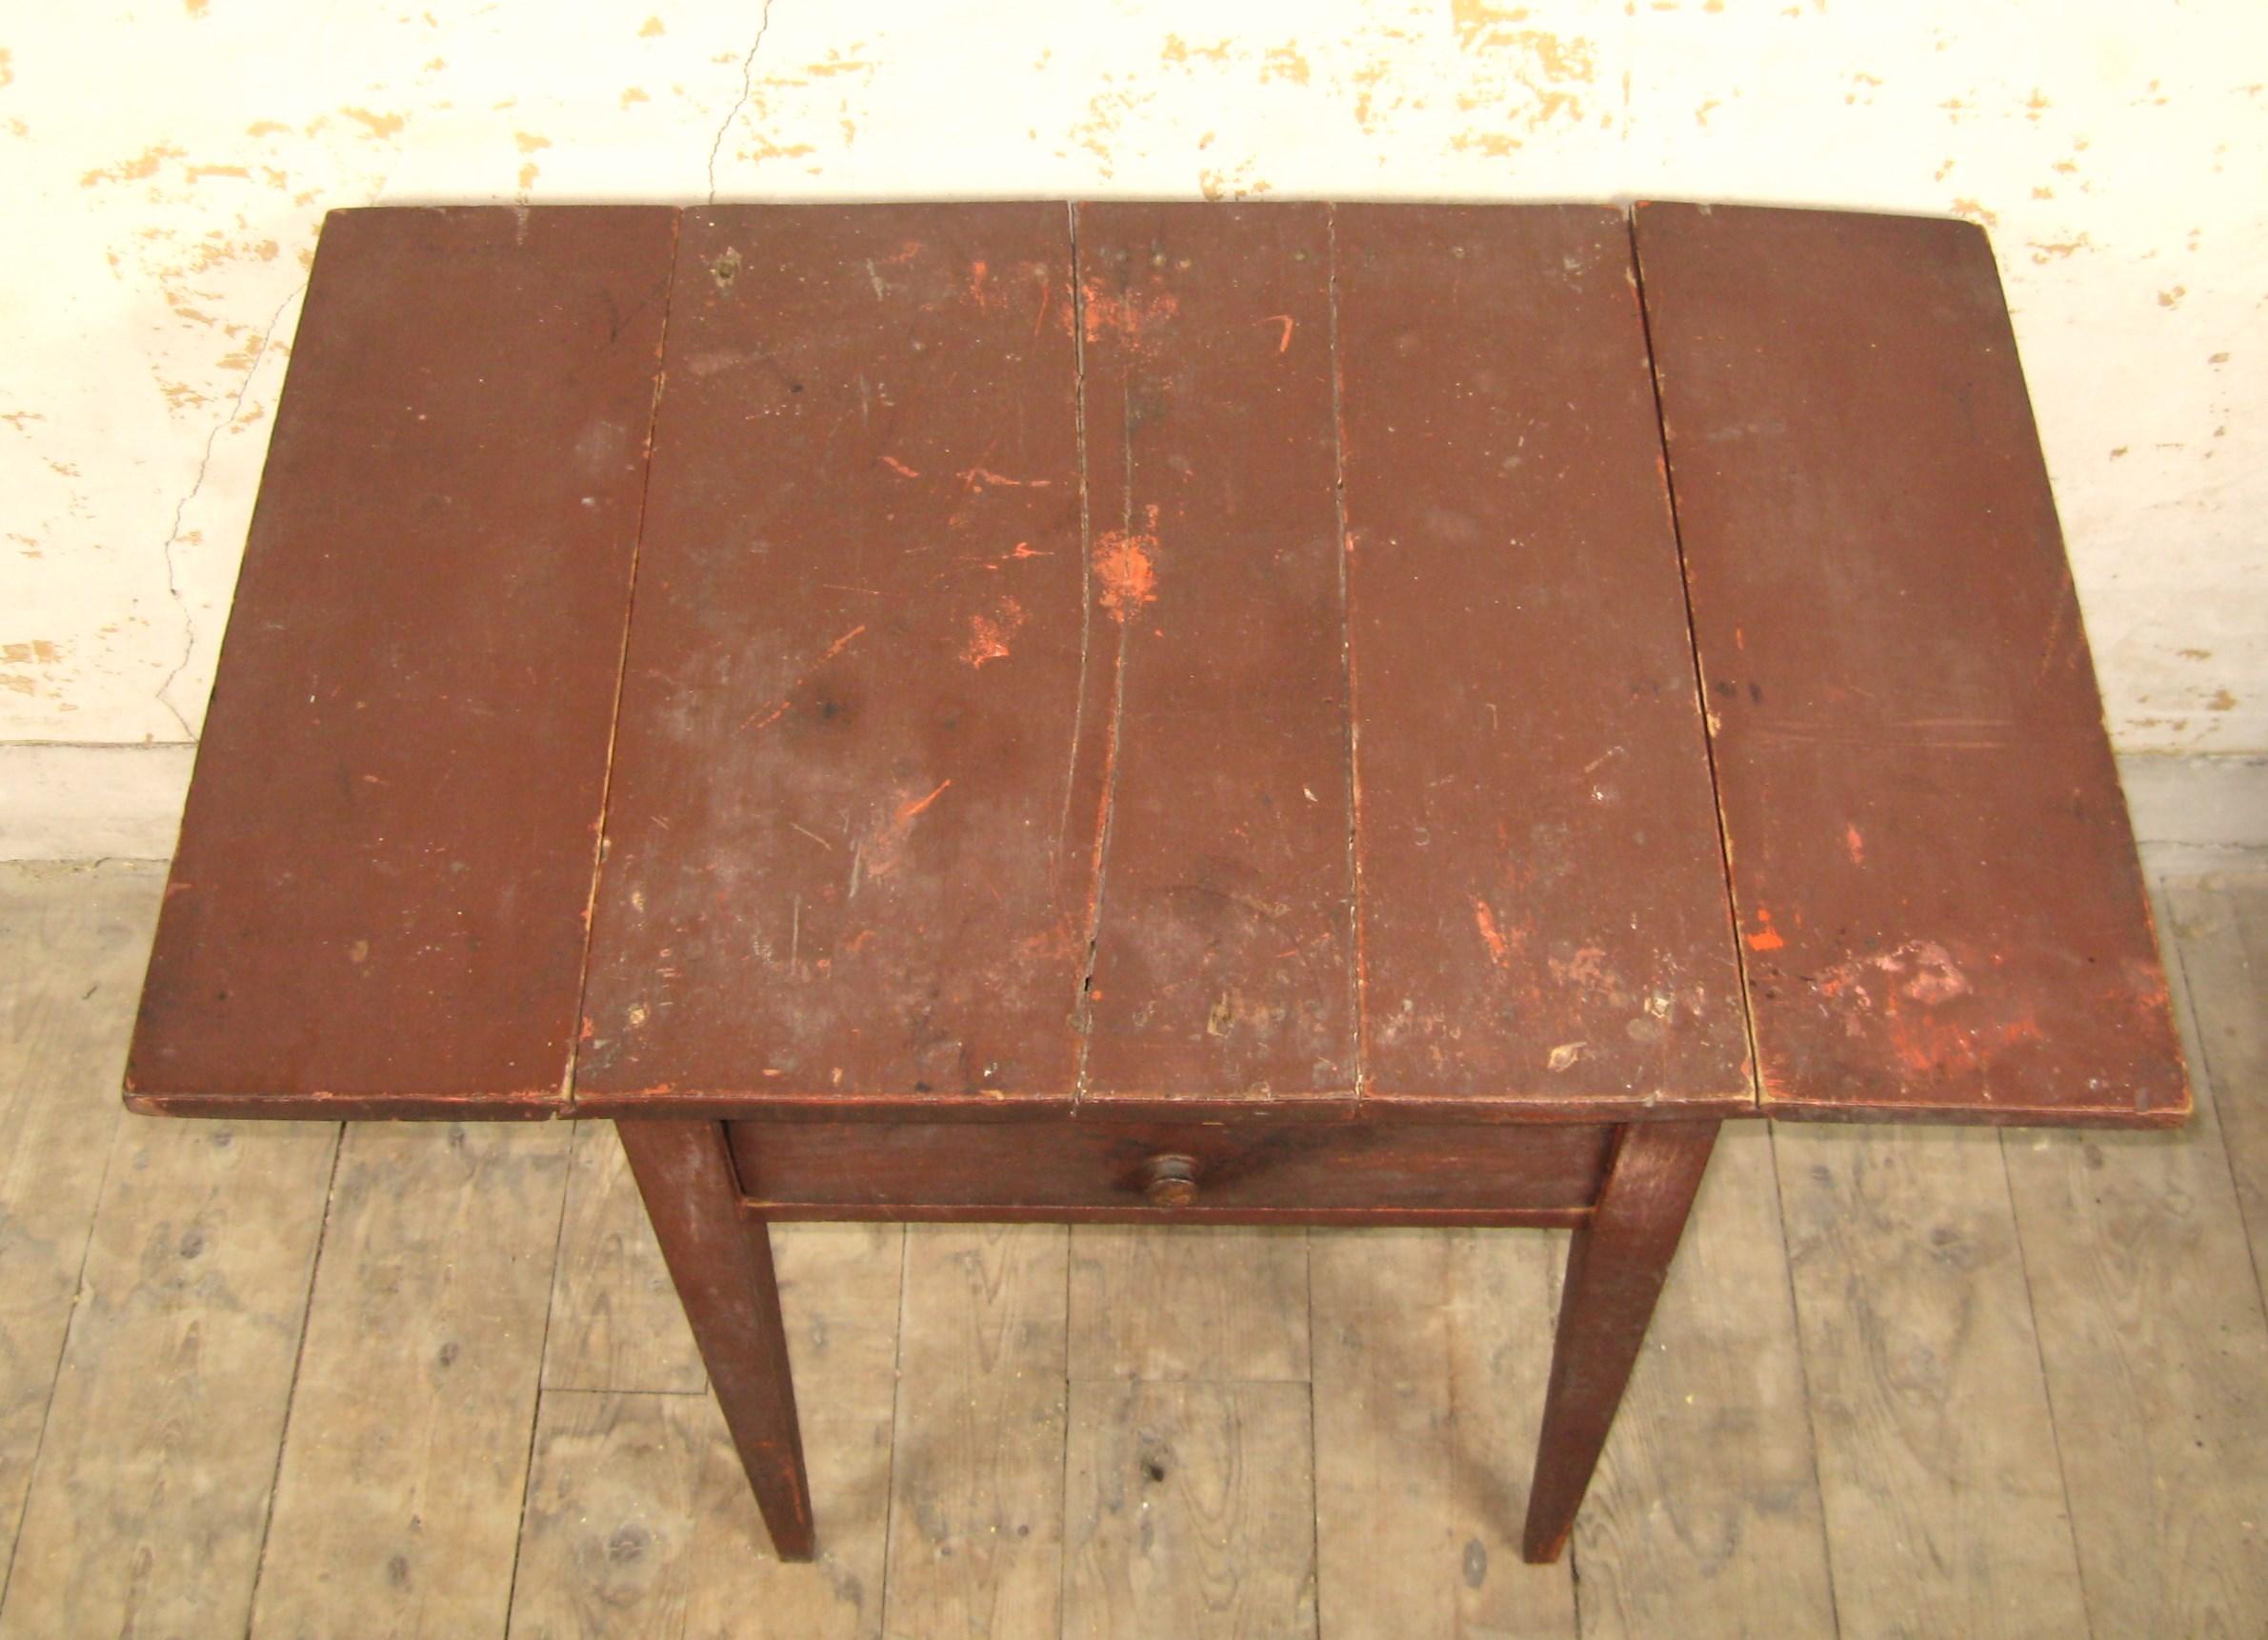 Hand-Crafted 19th Century Primitive Farm workDrop leaf table with Tapered Leg